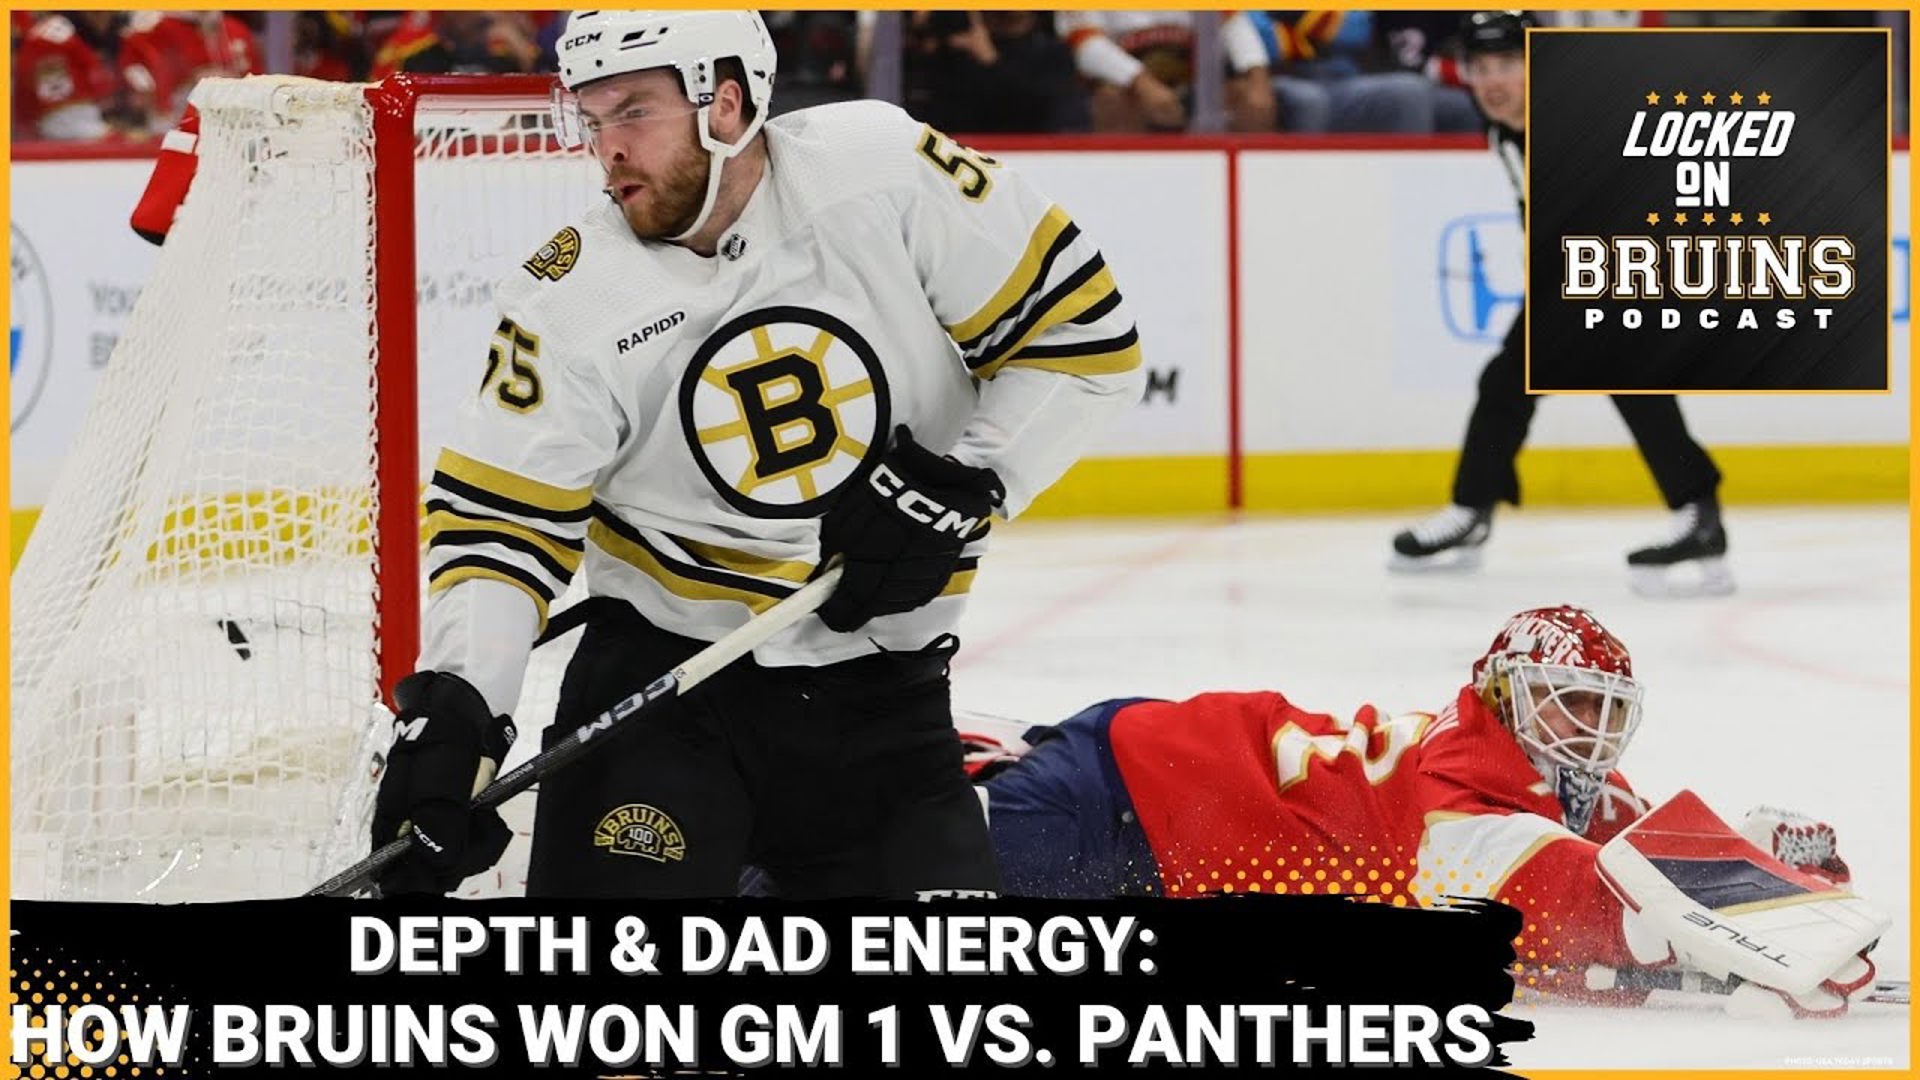 Depth and Dad Energy. How the Bruins took Game 1 vs. Panthers